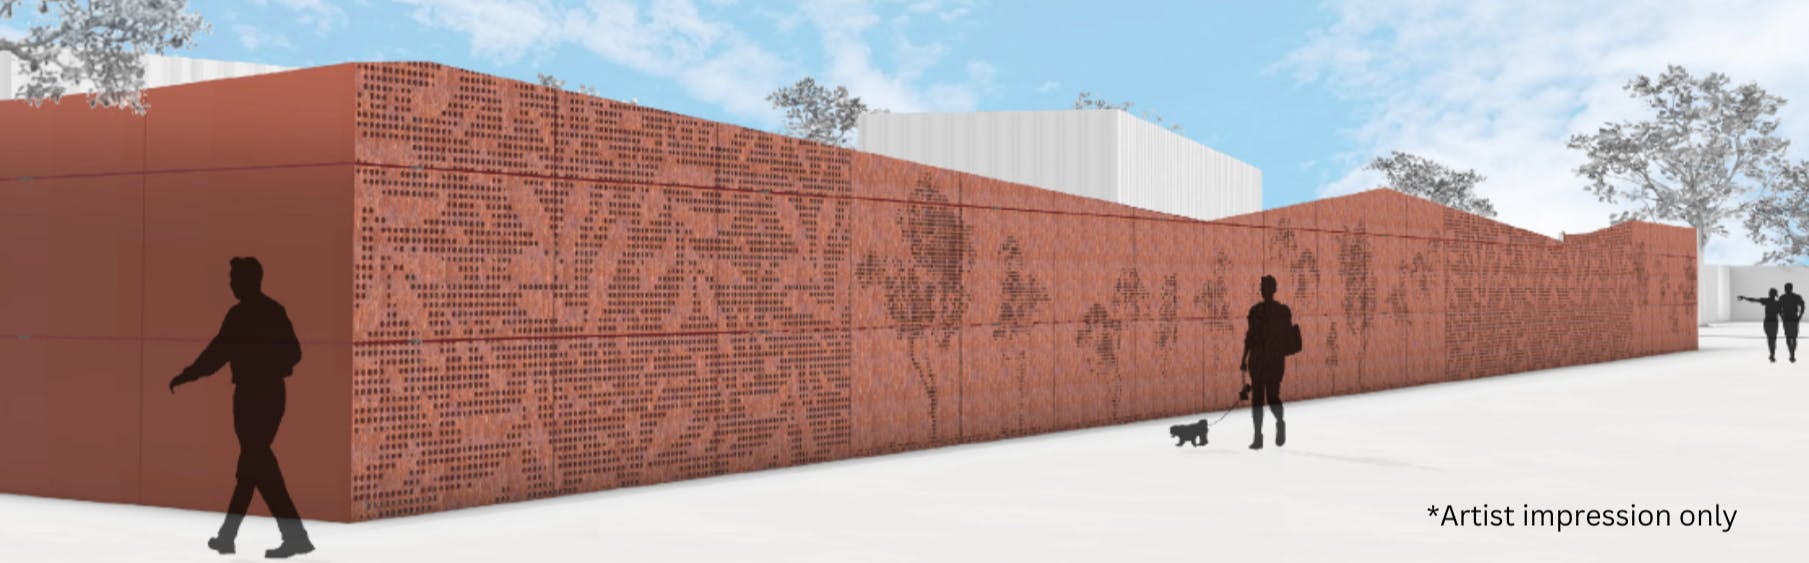 Artist impression of Ballarat East Substation showing nature inspired motifs on a multi-level orange-brown fence with people